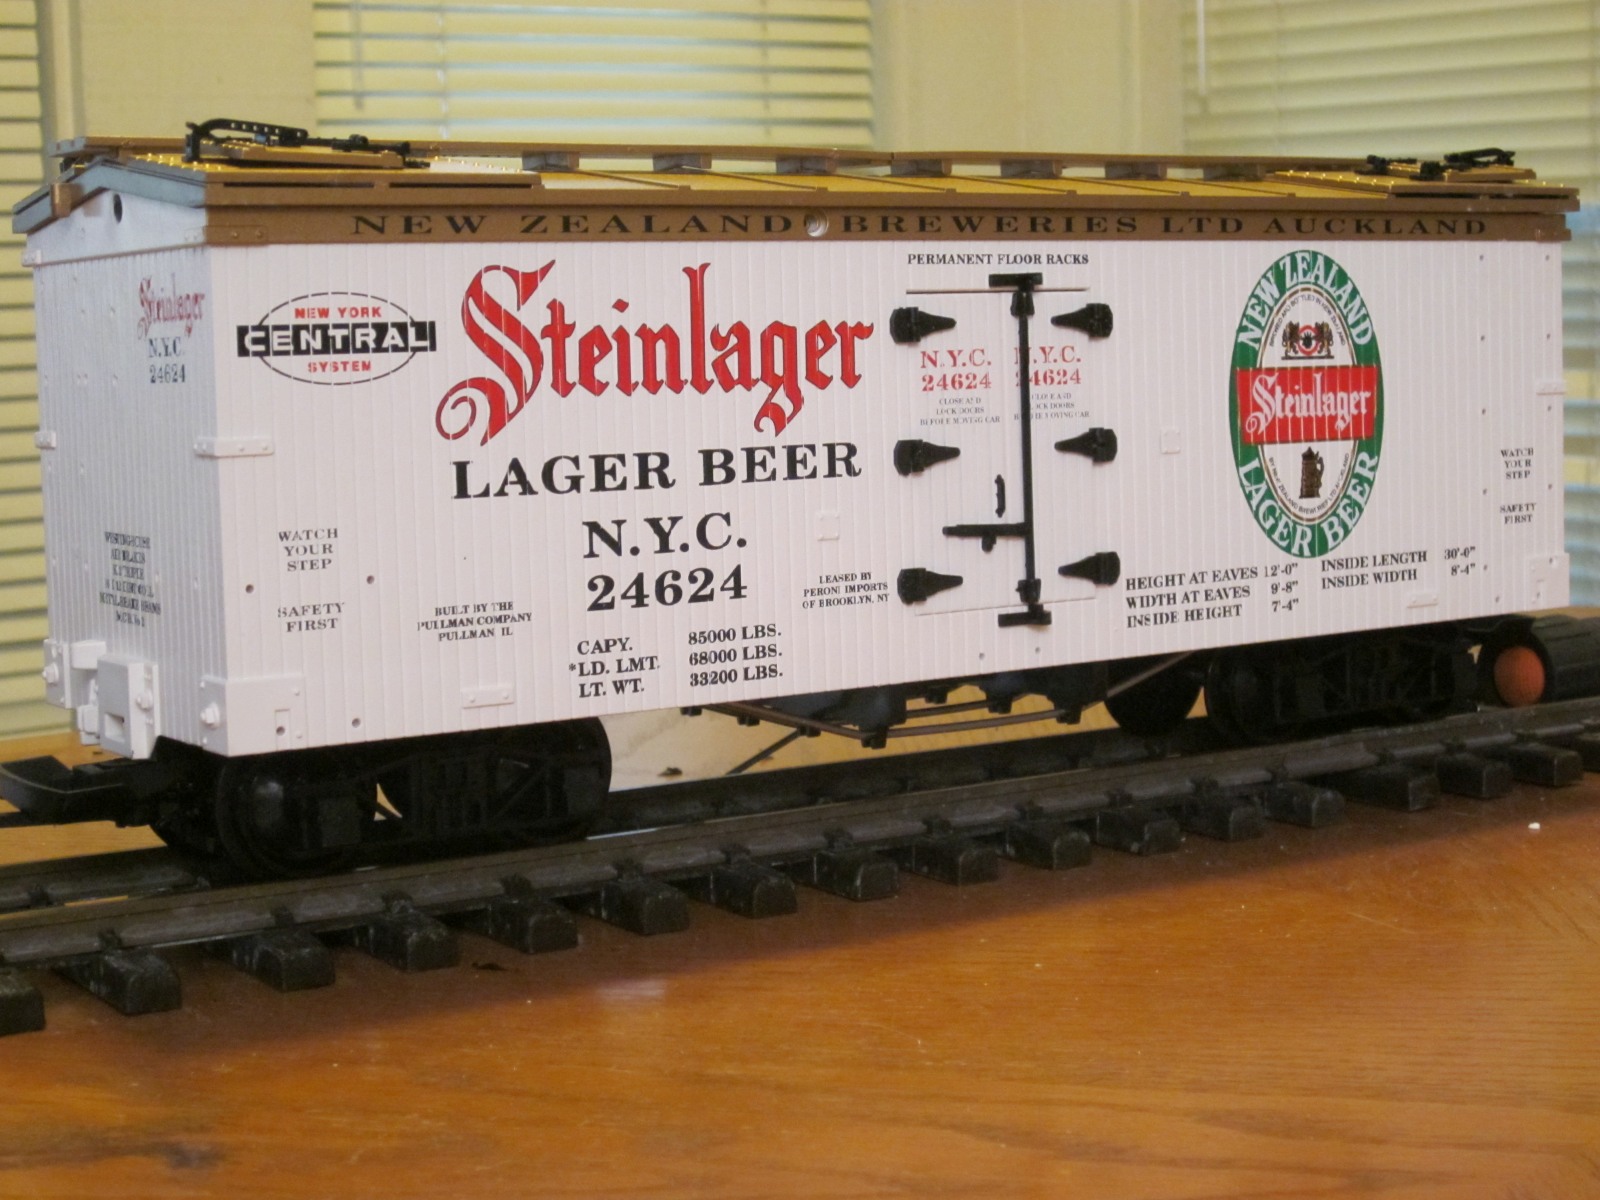 R16297 Steinlager Lager Beer NYC 24624